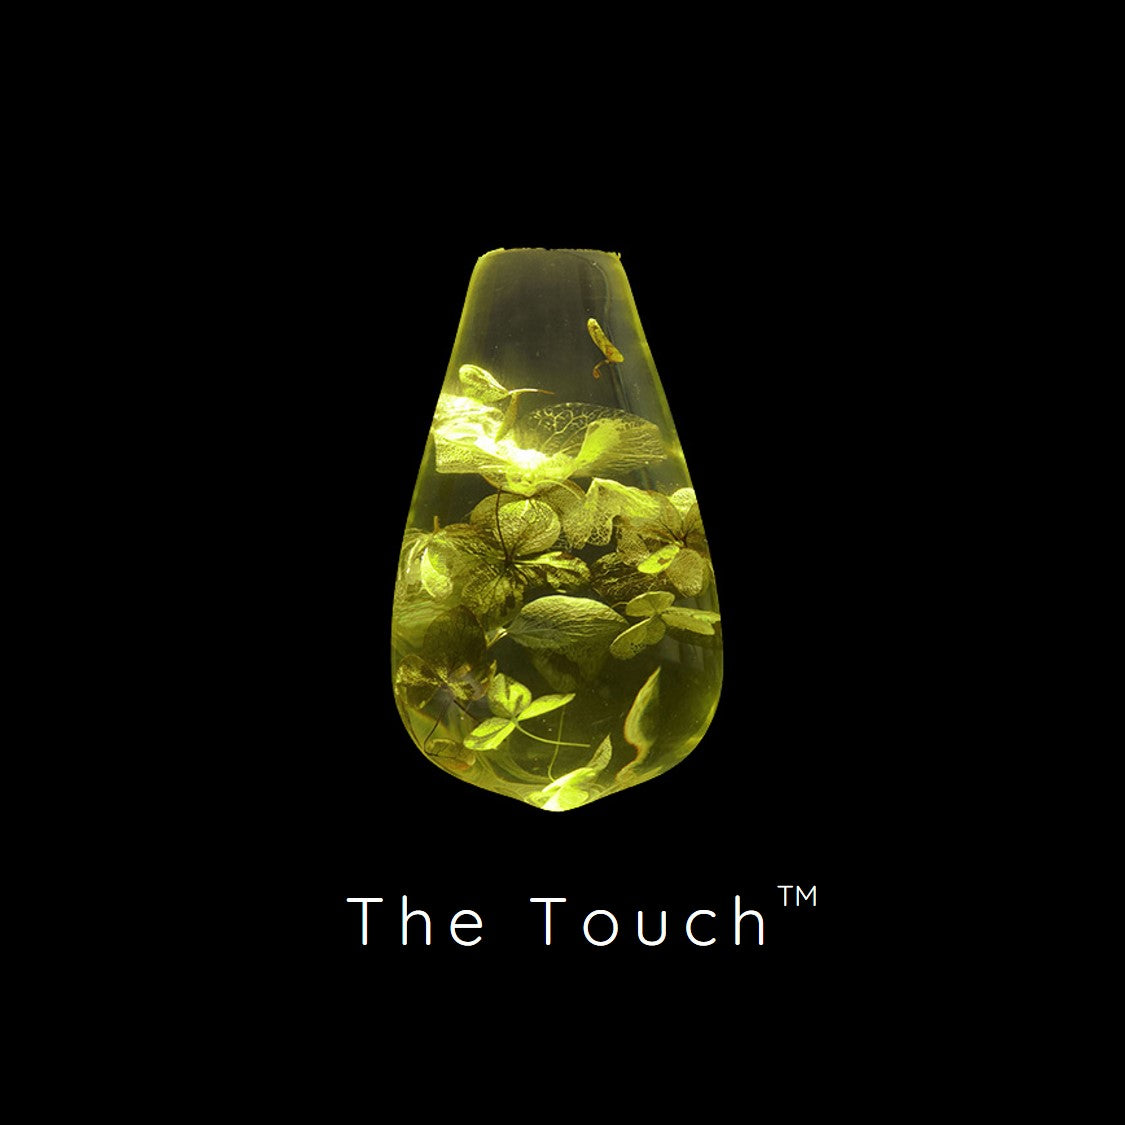 The Touch™